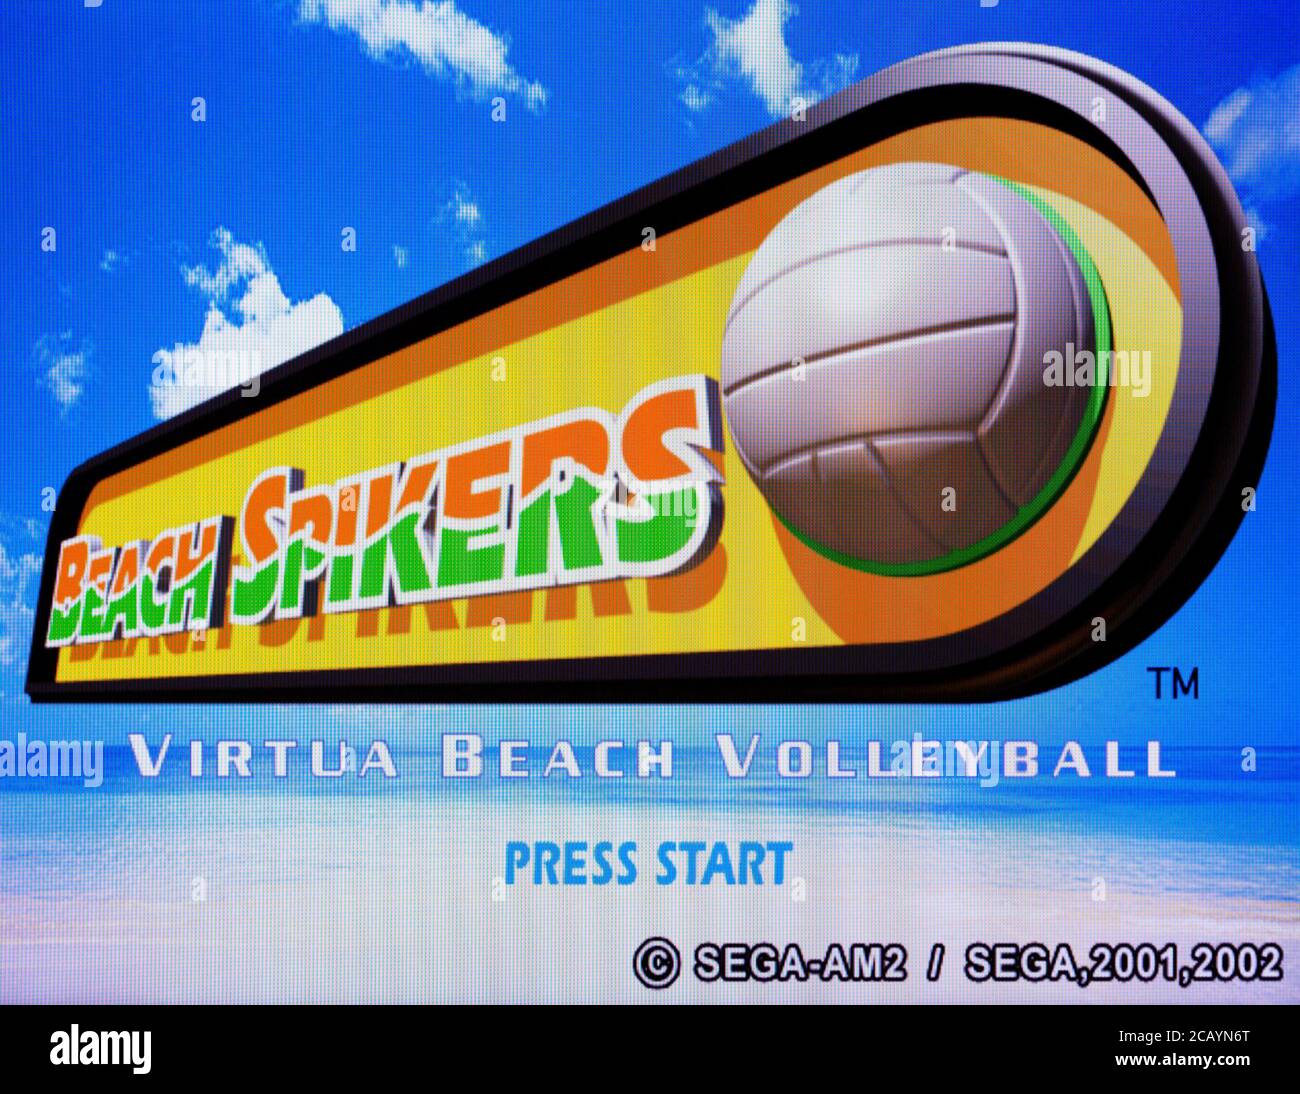 Beach Spikers - Nintendo Gamecube Videogame - Editorial use only Stock ...